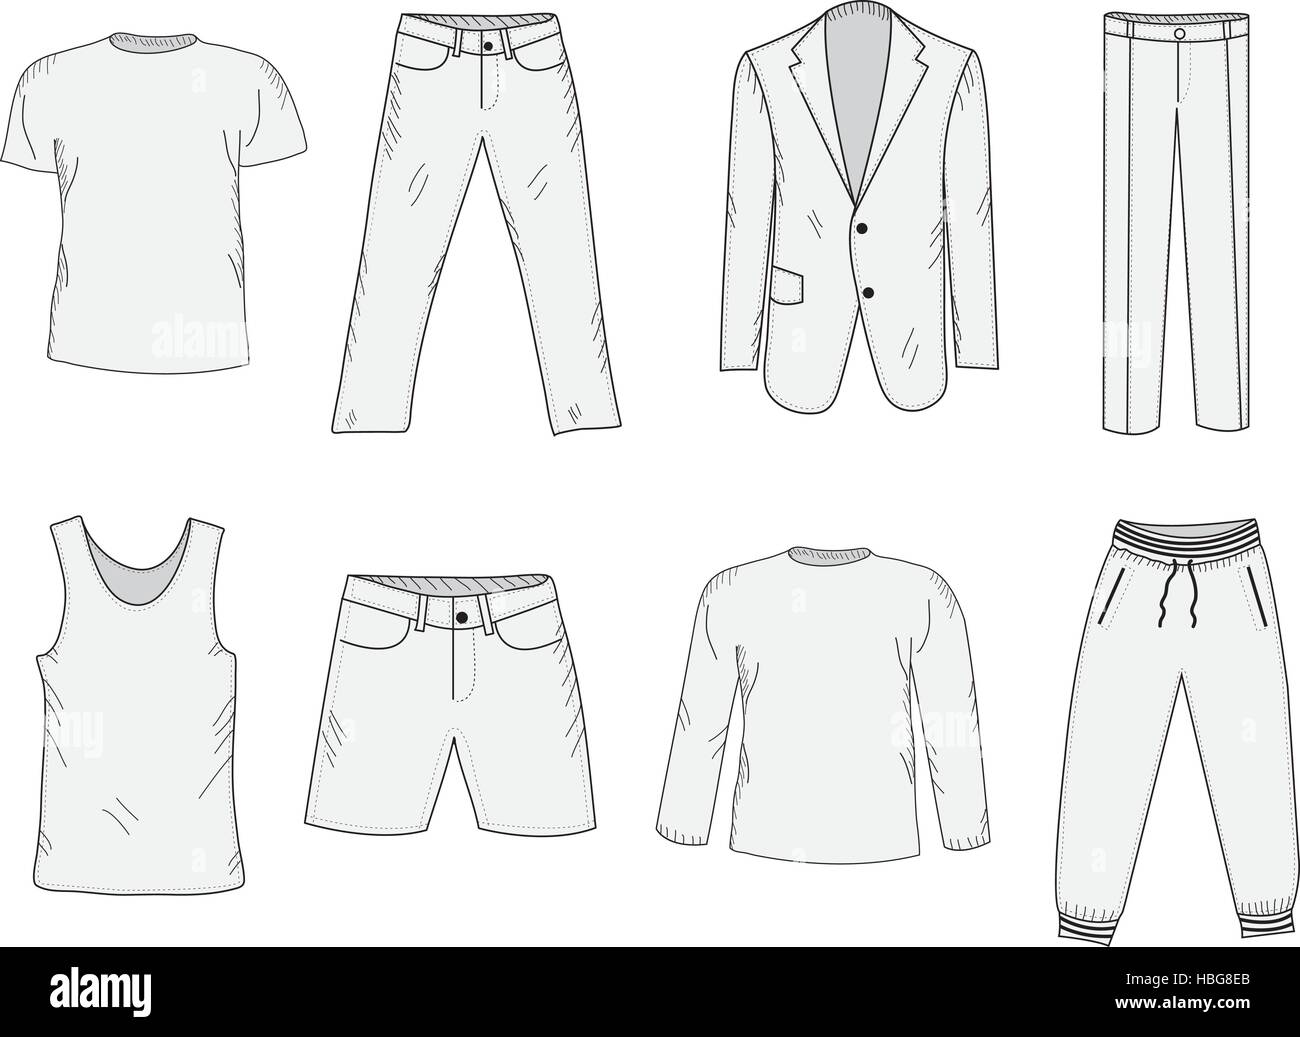 Clothing set sketch. Men's clothes, hand-drawing style. Business suit, jogging suit, T-shirt and shorts, summer clothes. Men's clothes vector illustration. Stock Vector